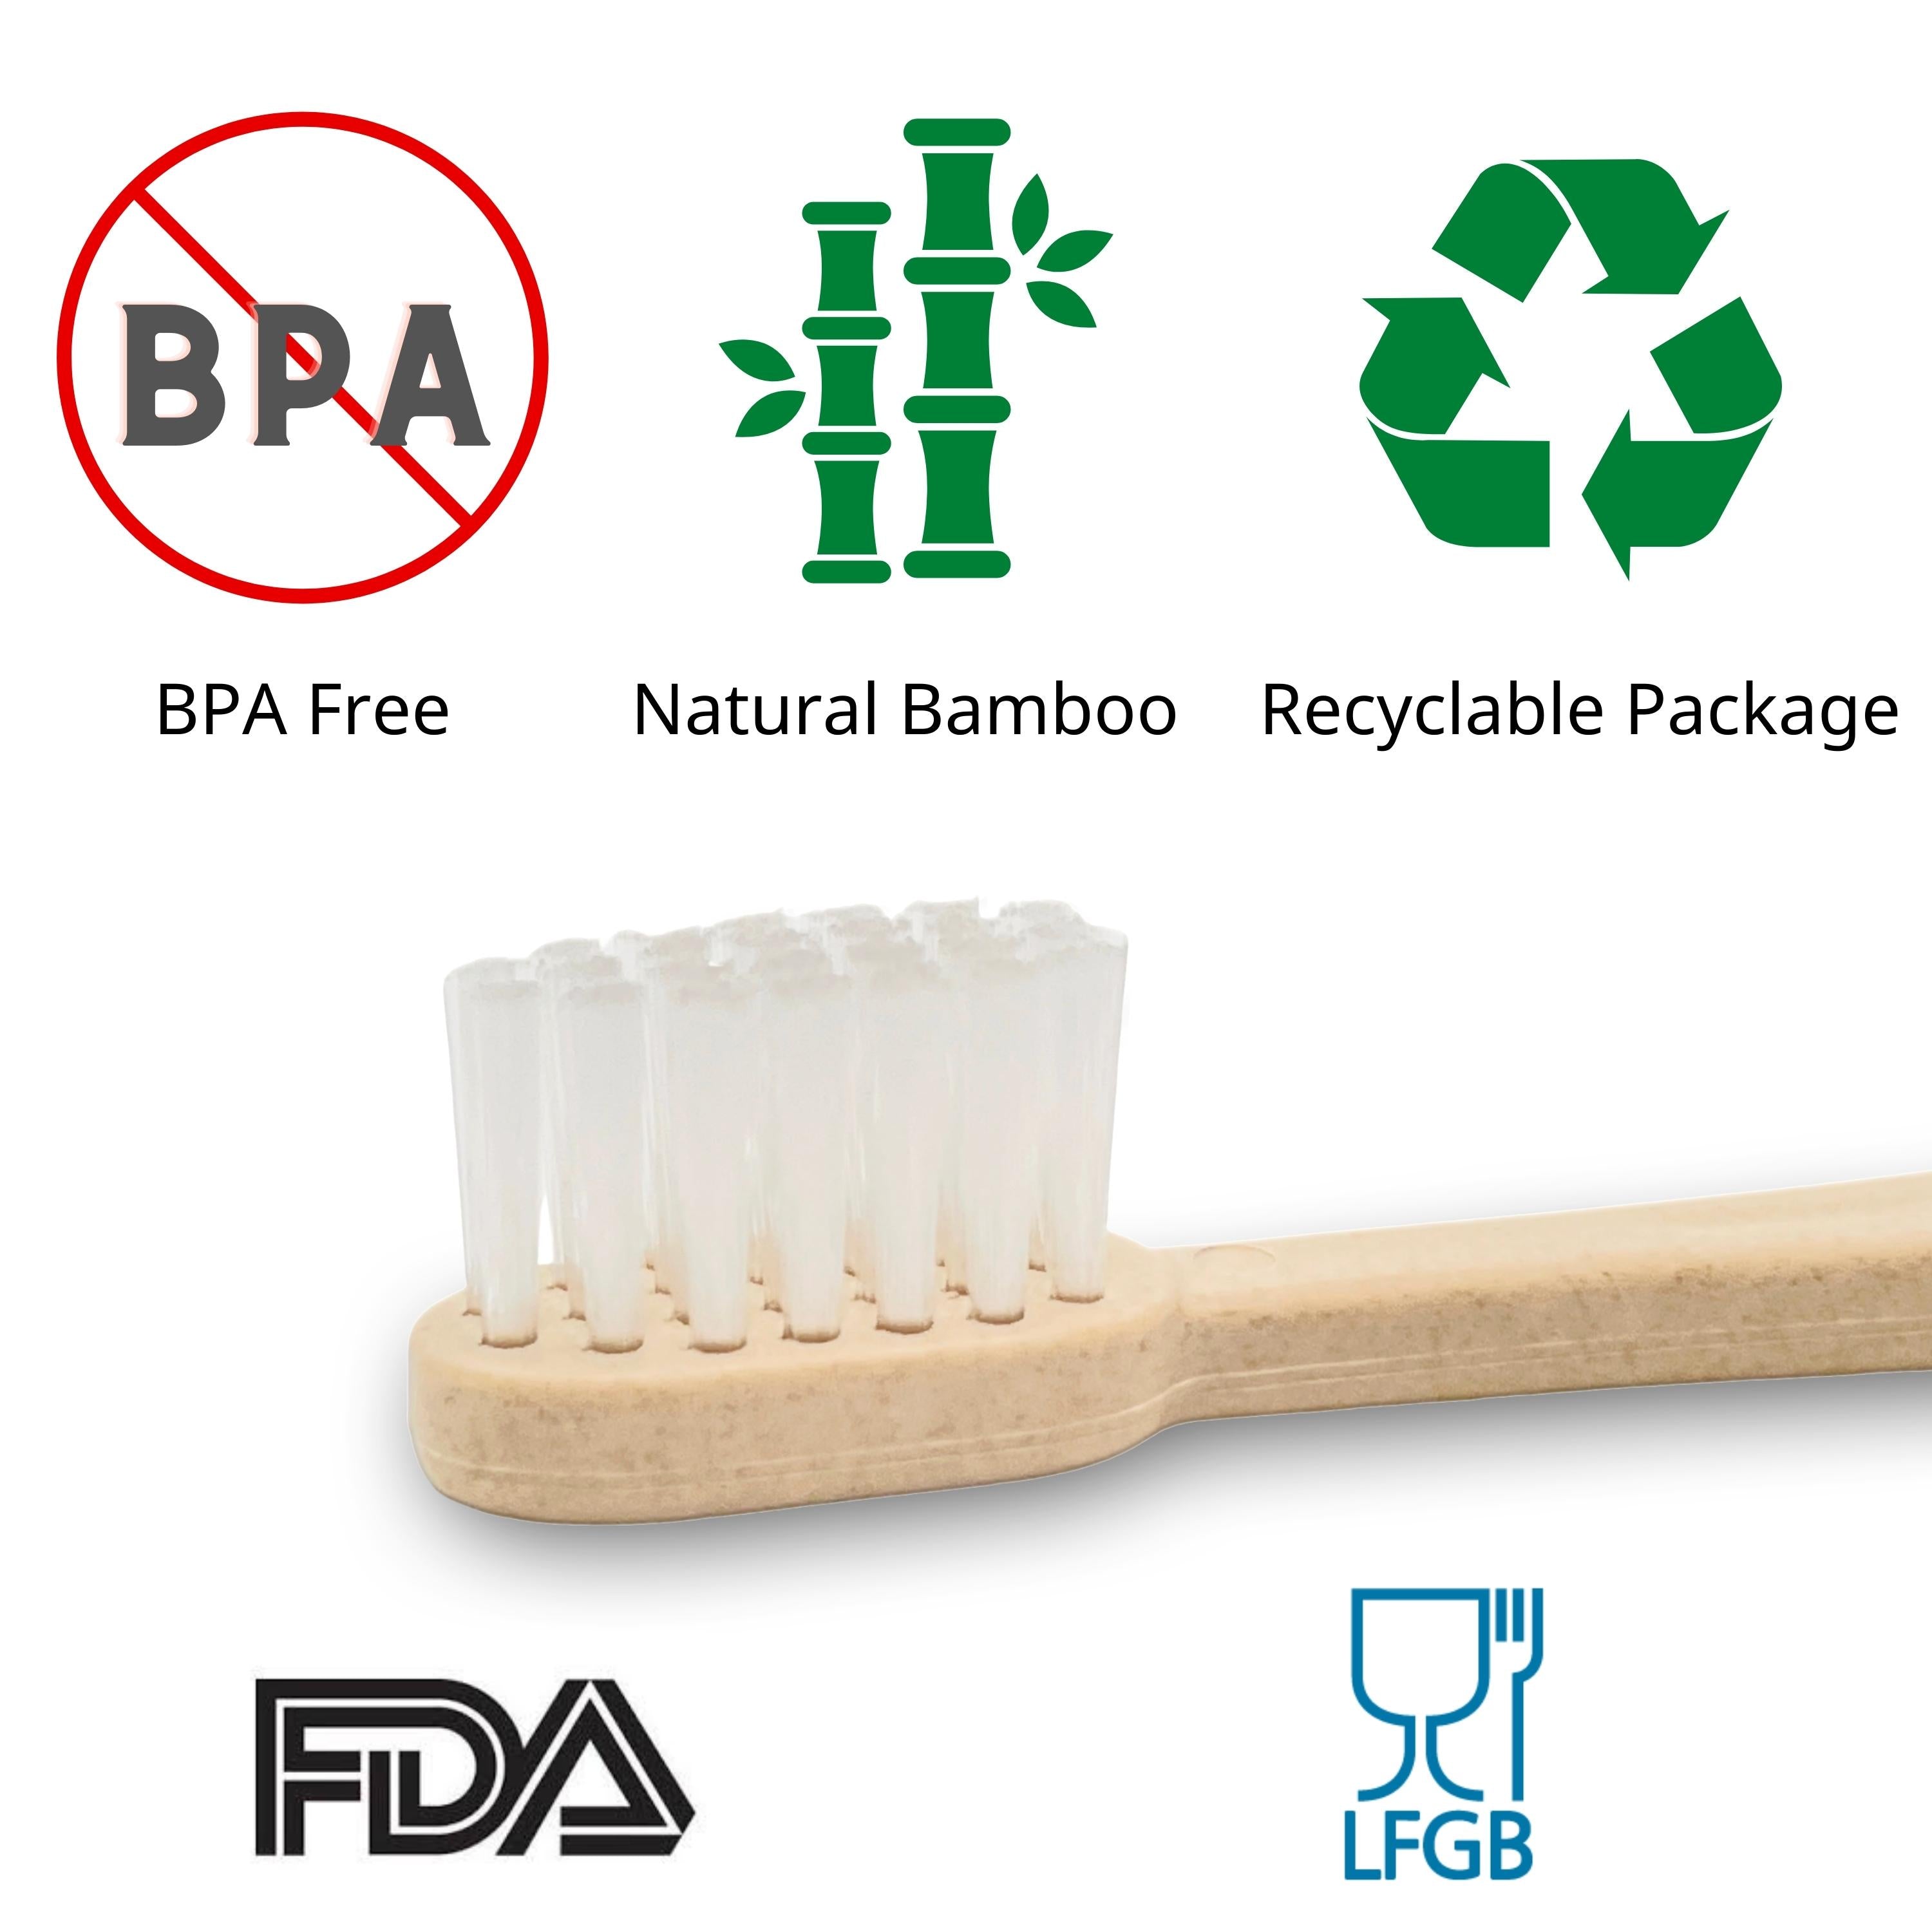 10 pack- bamboo toothbrush soft bristles natural bpa-free eco-friendly compostable sustainable recyclable green manual travel hotel toothbrushes health 10 pack - CHANYI eco10 pack- bamboo toothbrush soft bristles natural bpa-free eco-friendly compostable sustainable recyclable green manual travel hotel toothbrushes health 10 pack - CHANYI eco